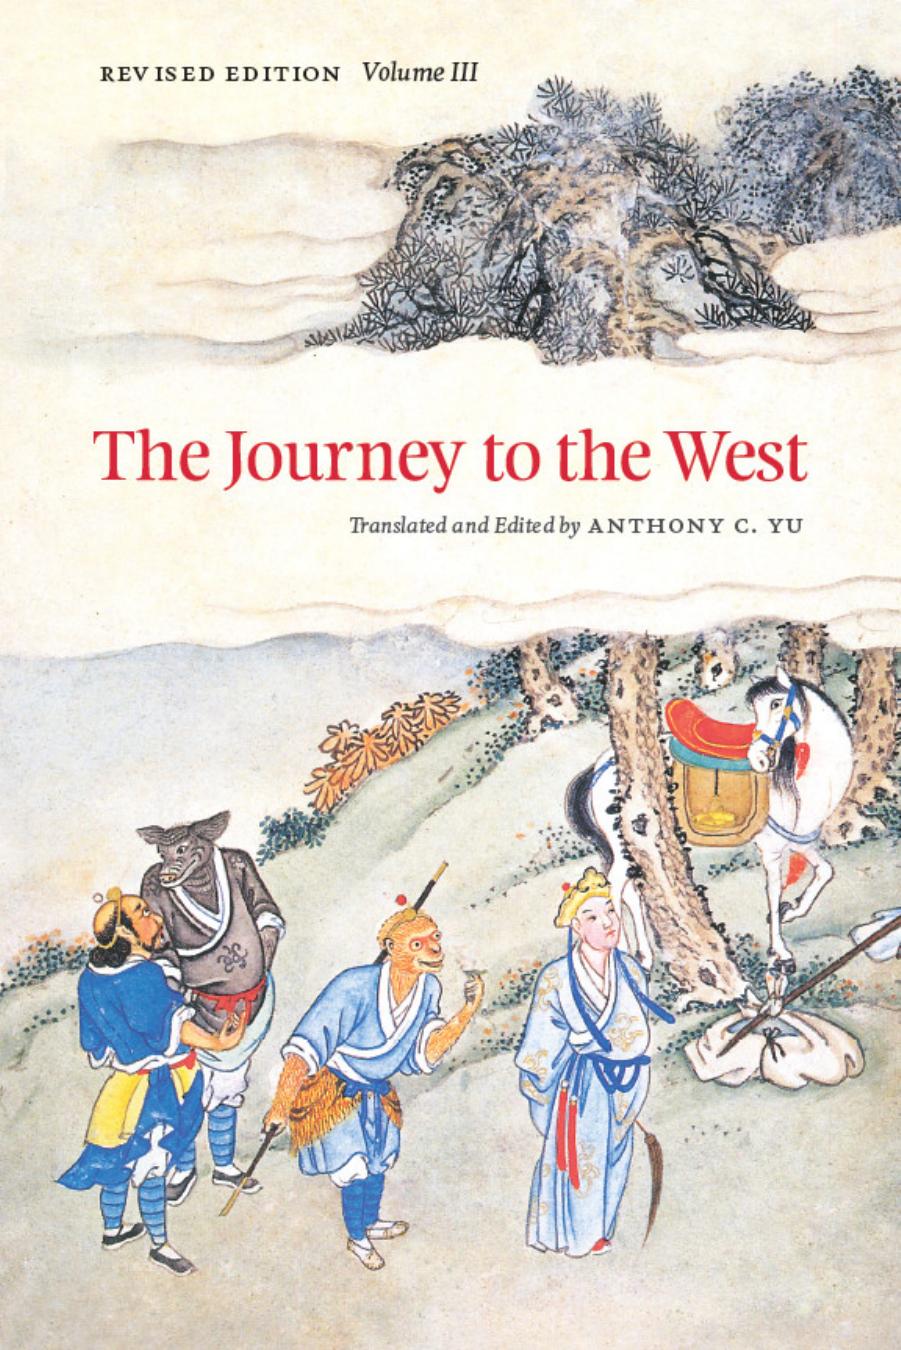 The Journey to the West Volume III